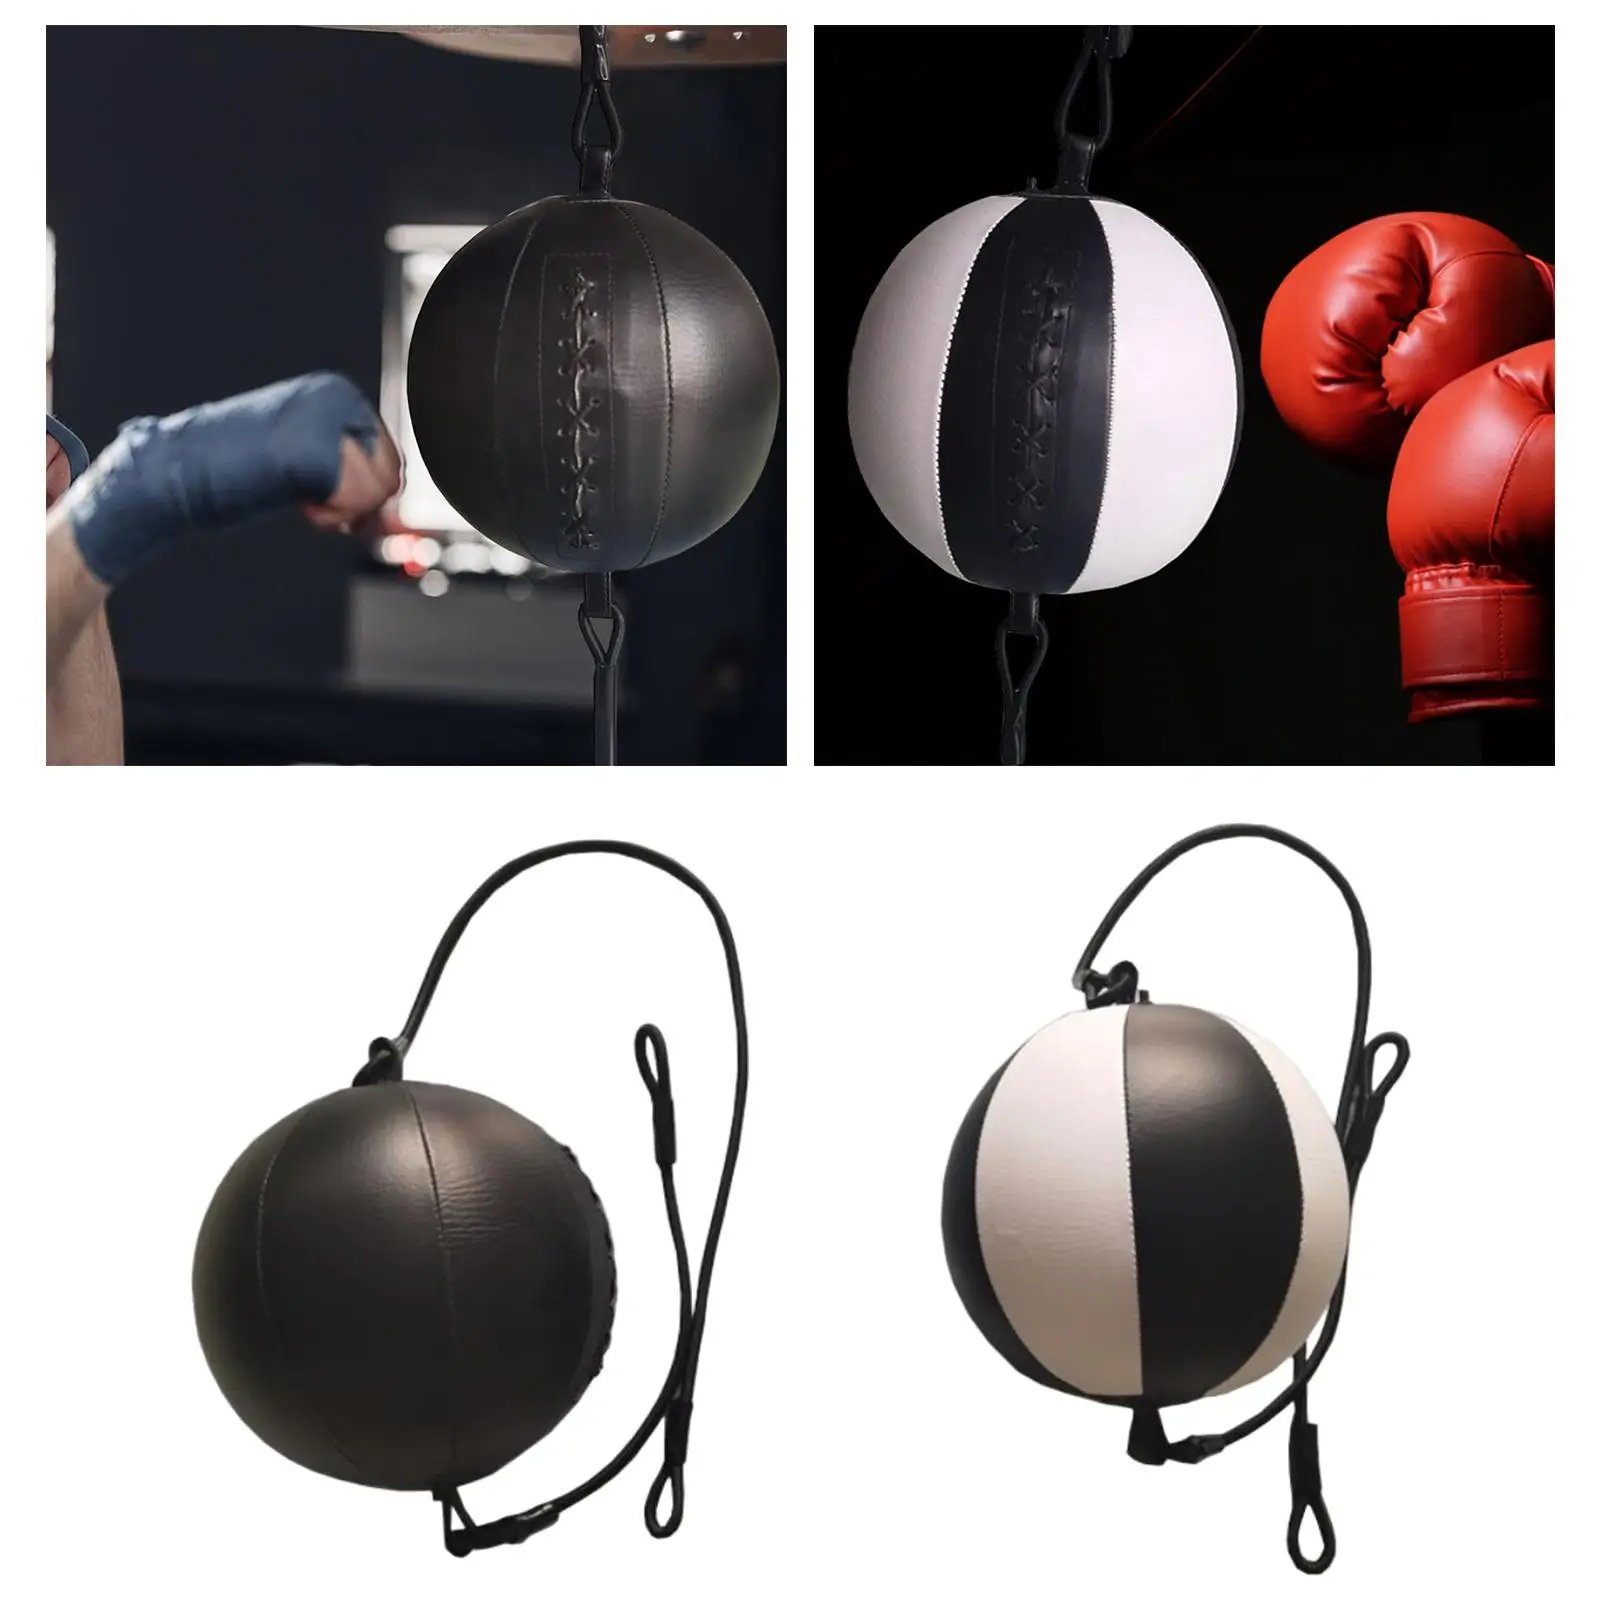 echooutdor Durable Boxing Ball Elastic Rope for Exercise Workout Fitness